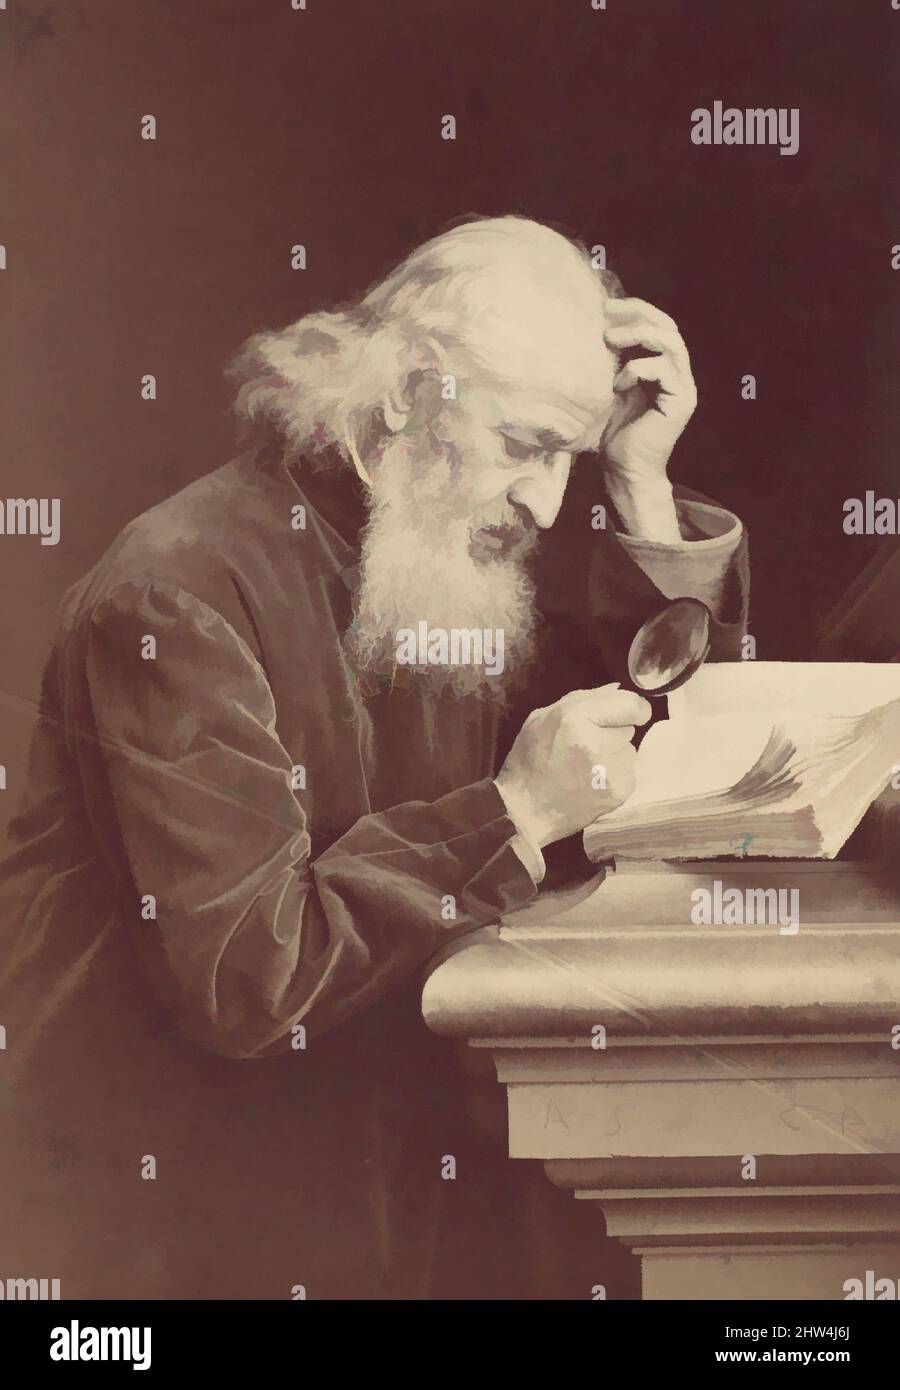 Art inspired by Bearded Man with Magnifying Glass Examining a Manuscript, 1870s, Albumen silver print from glass negative, Photographs, Antoine-Samuel Adam-Salomon (French, La Ferté-sous-Jouarre 1811–1881 Paris, Classic works modernized by Artotop with a splash of modernity. Shapes, color and value, eye-catching visual impact on art. Emotions through freedom of artworks in a contemporary way. A timeless message pursuing a wildly creative new direction. Artists turning to the digital medium and creating the Artotop NFT Stock Photo